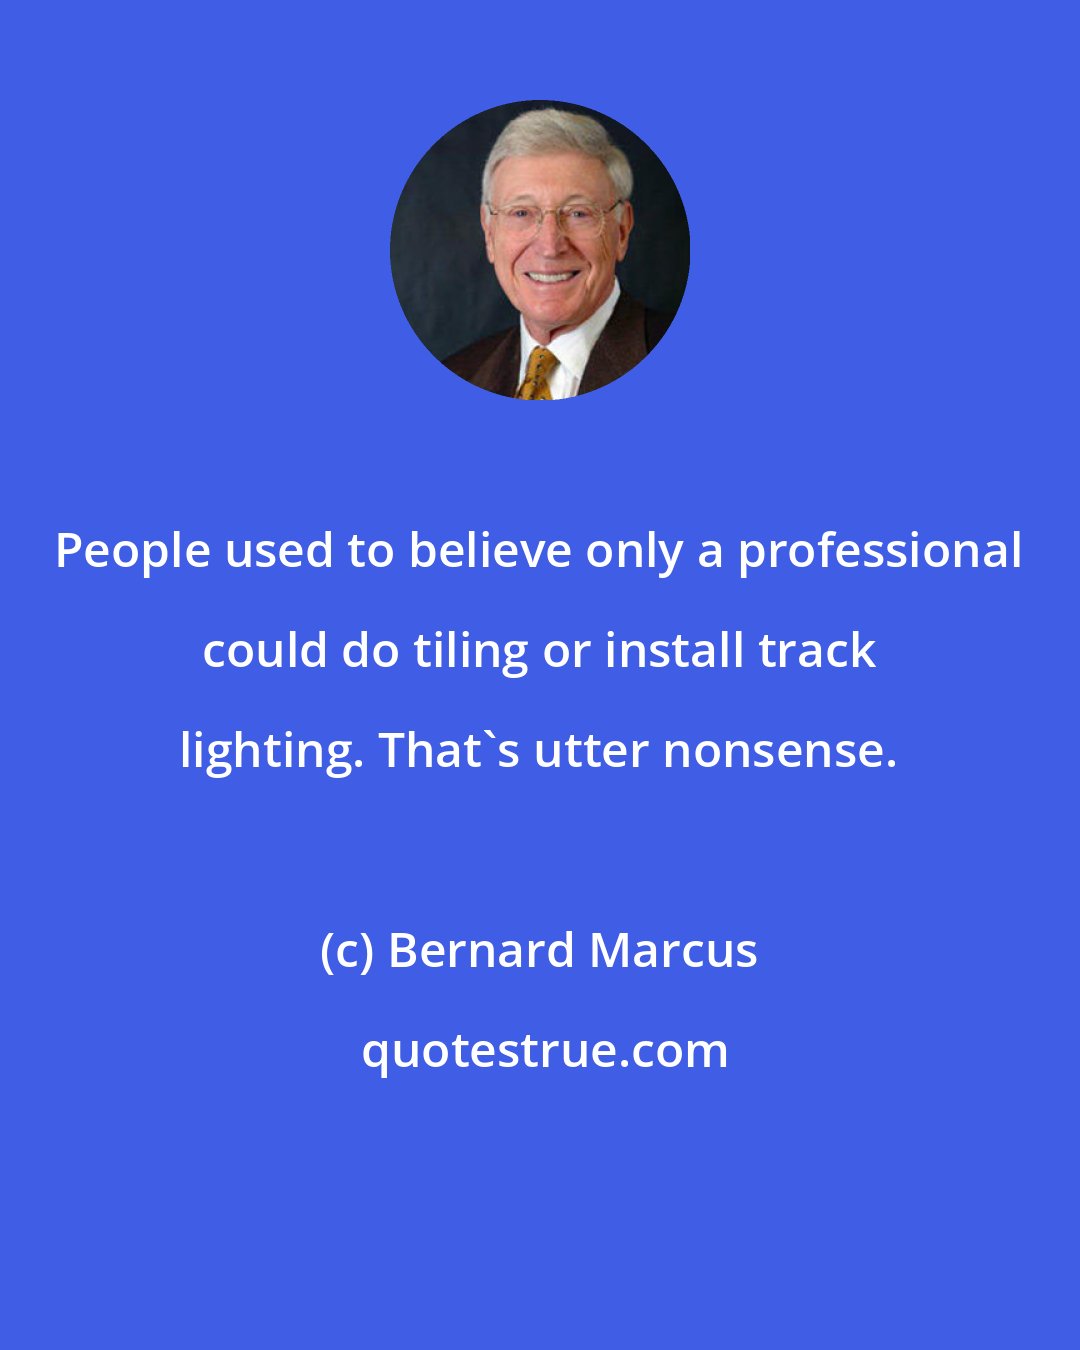 Bernard Marcus: People used to believe only a professional could do tiling or install track lighting. That's utter nonsense.